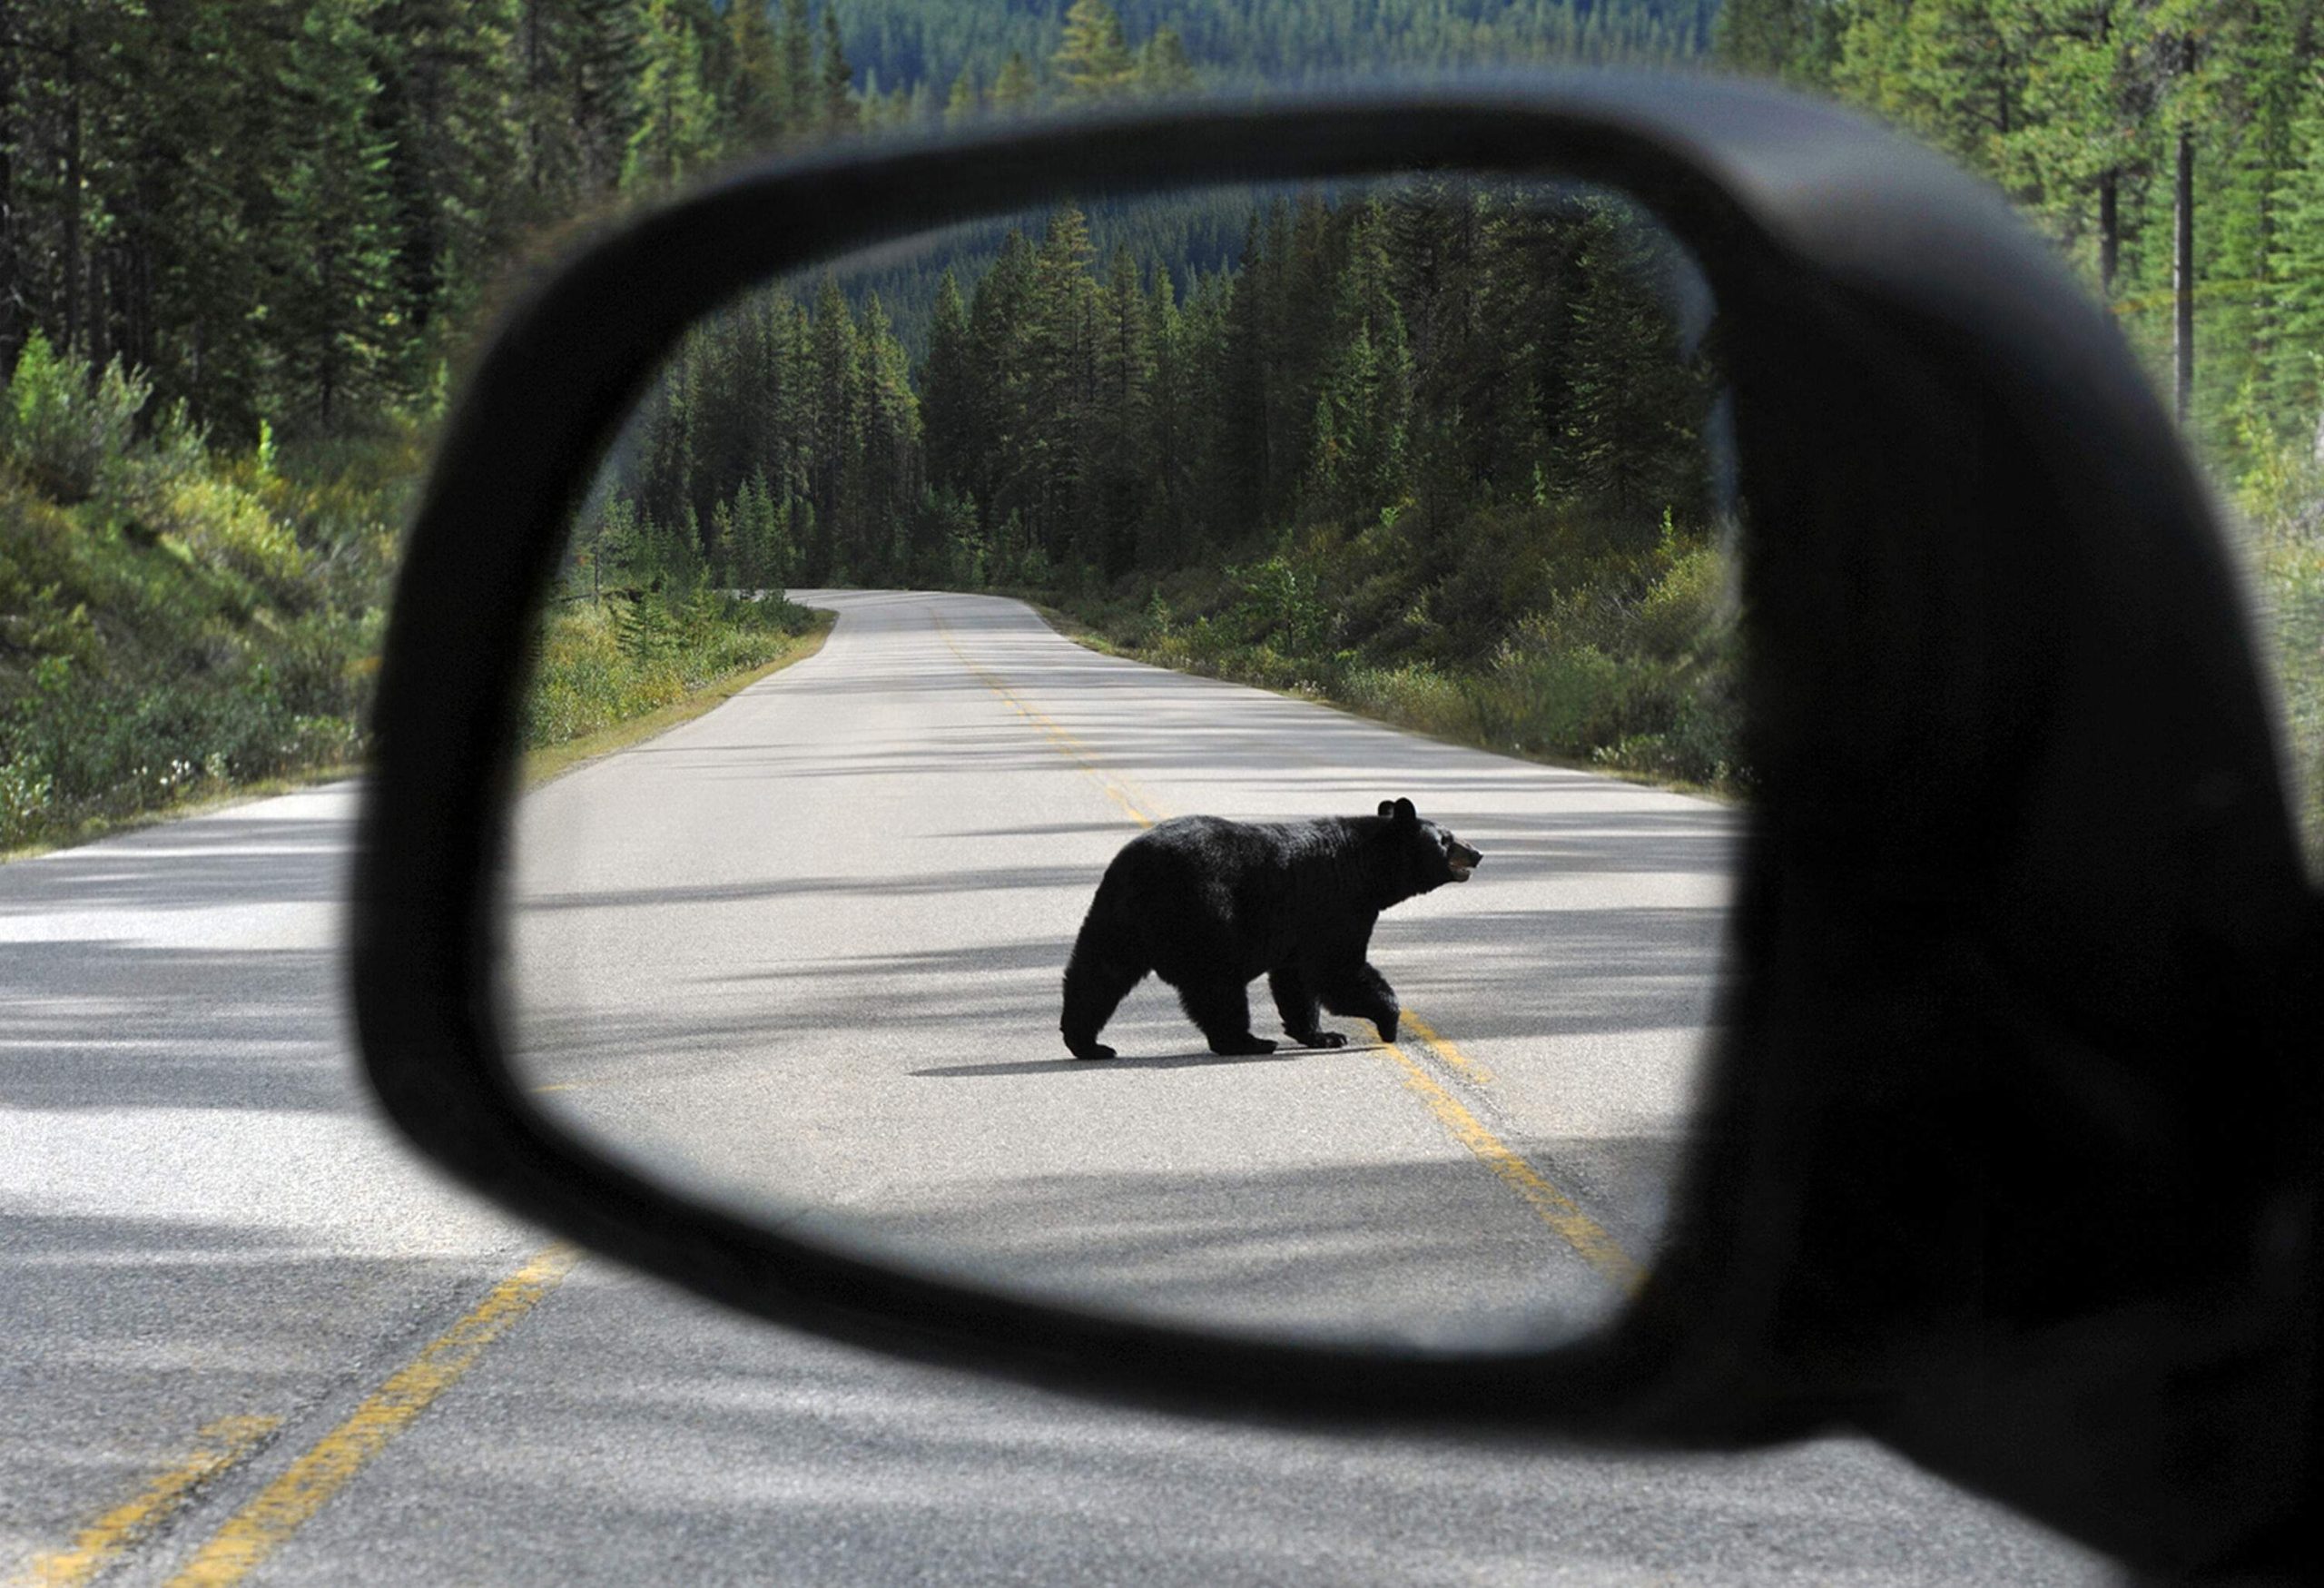 A black bear crosses a road as seen from a car's side mirror.